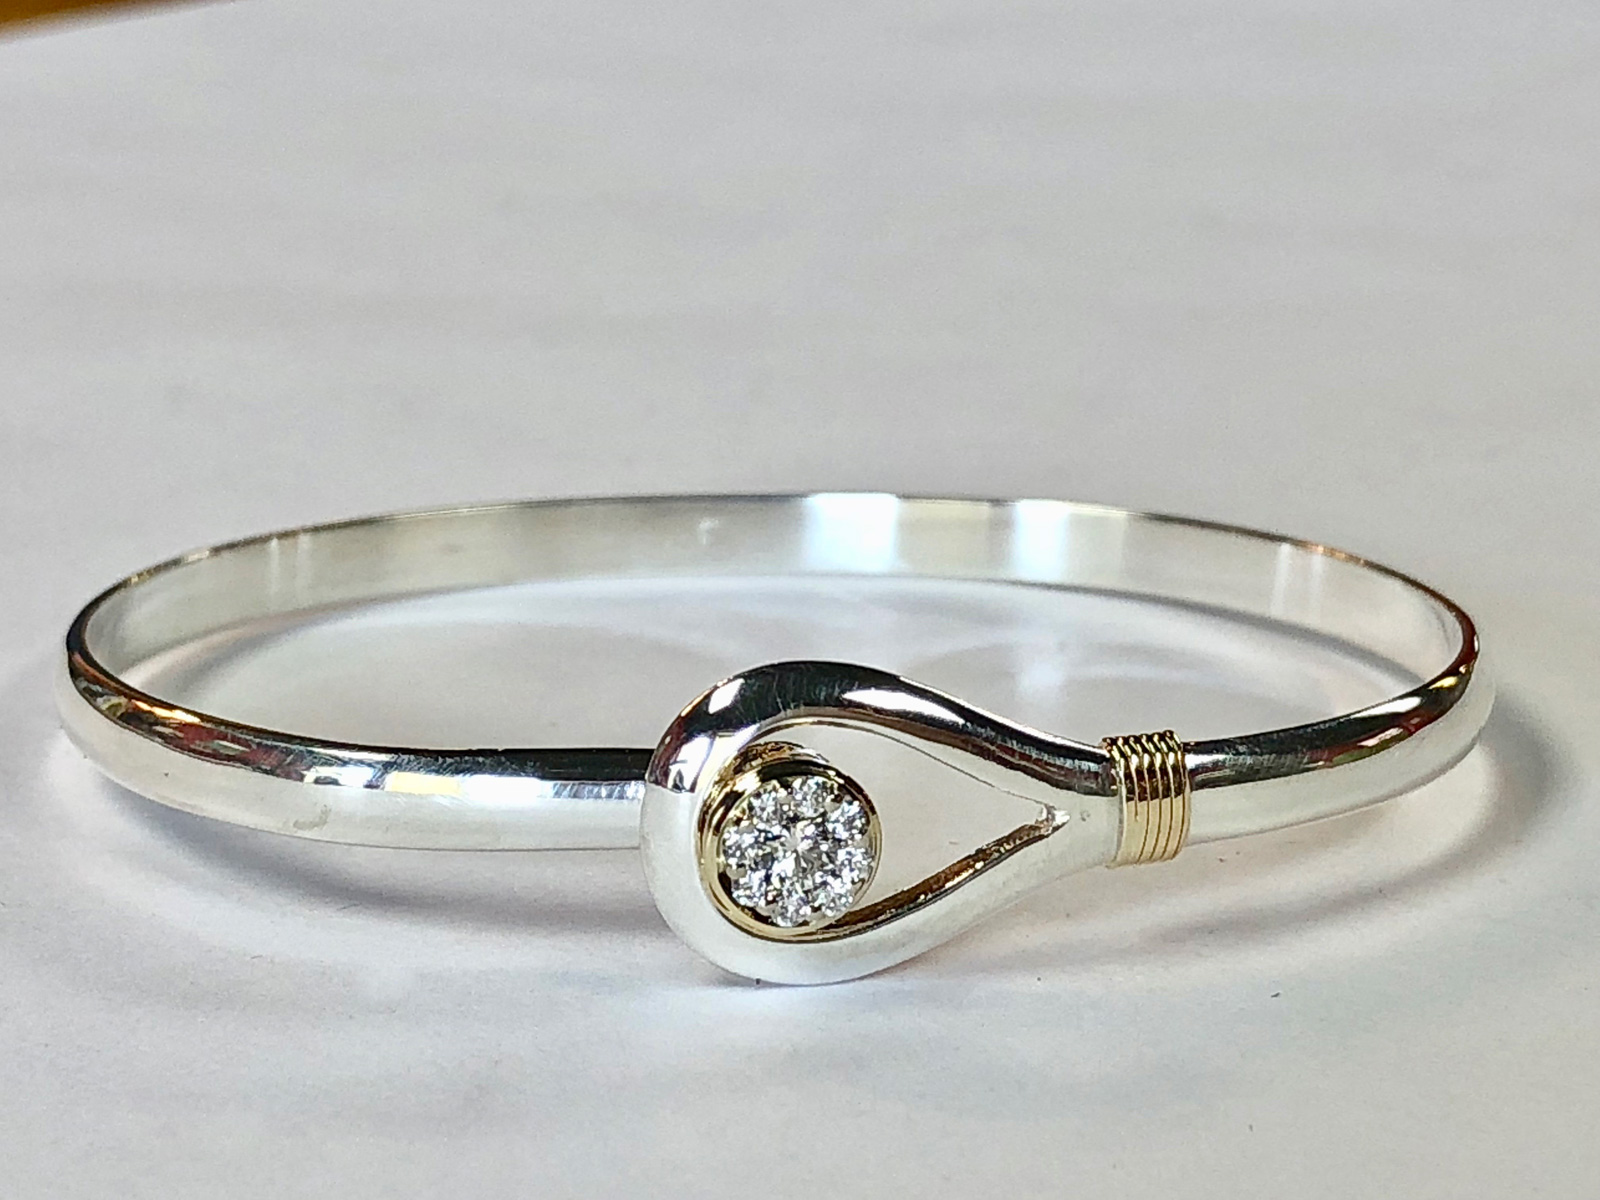 bangle bracelet with diamond cluster and loop clasp - R H Weber Jewelry